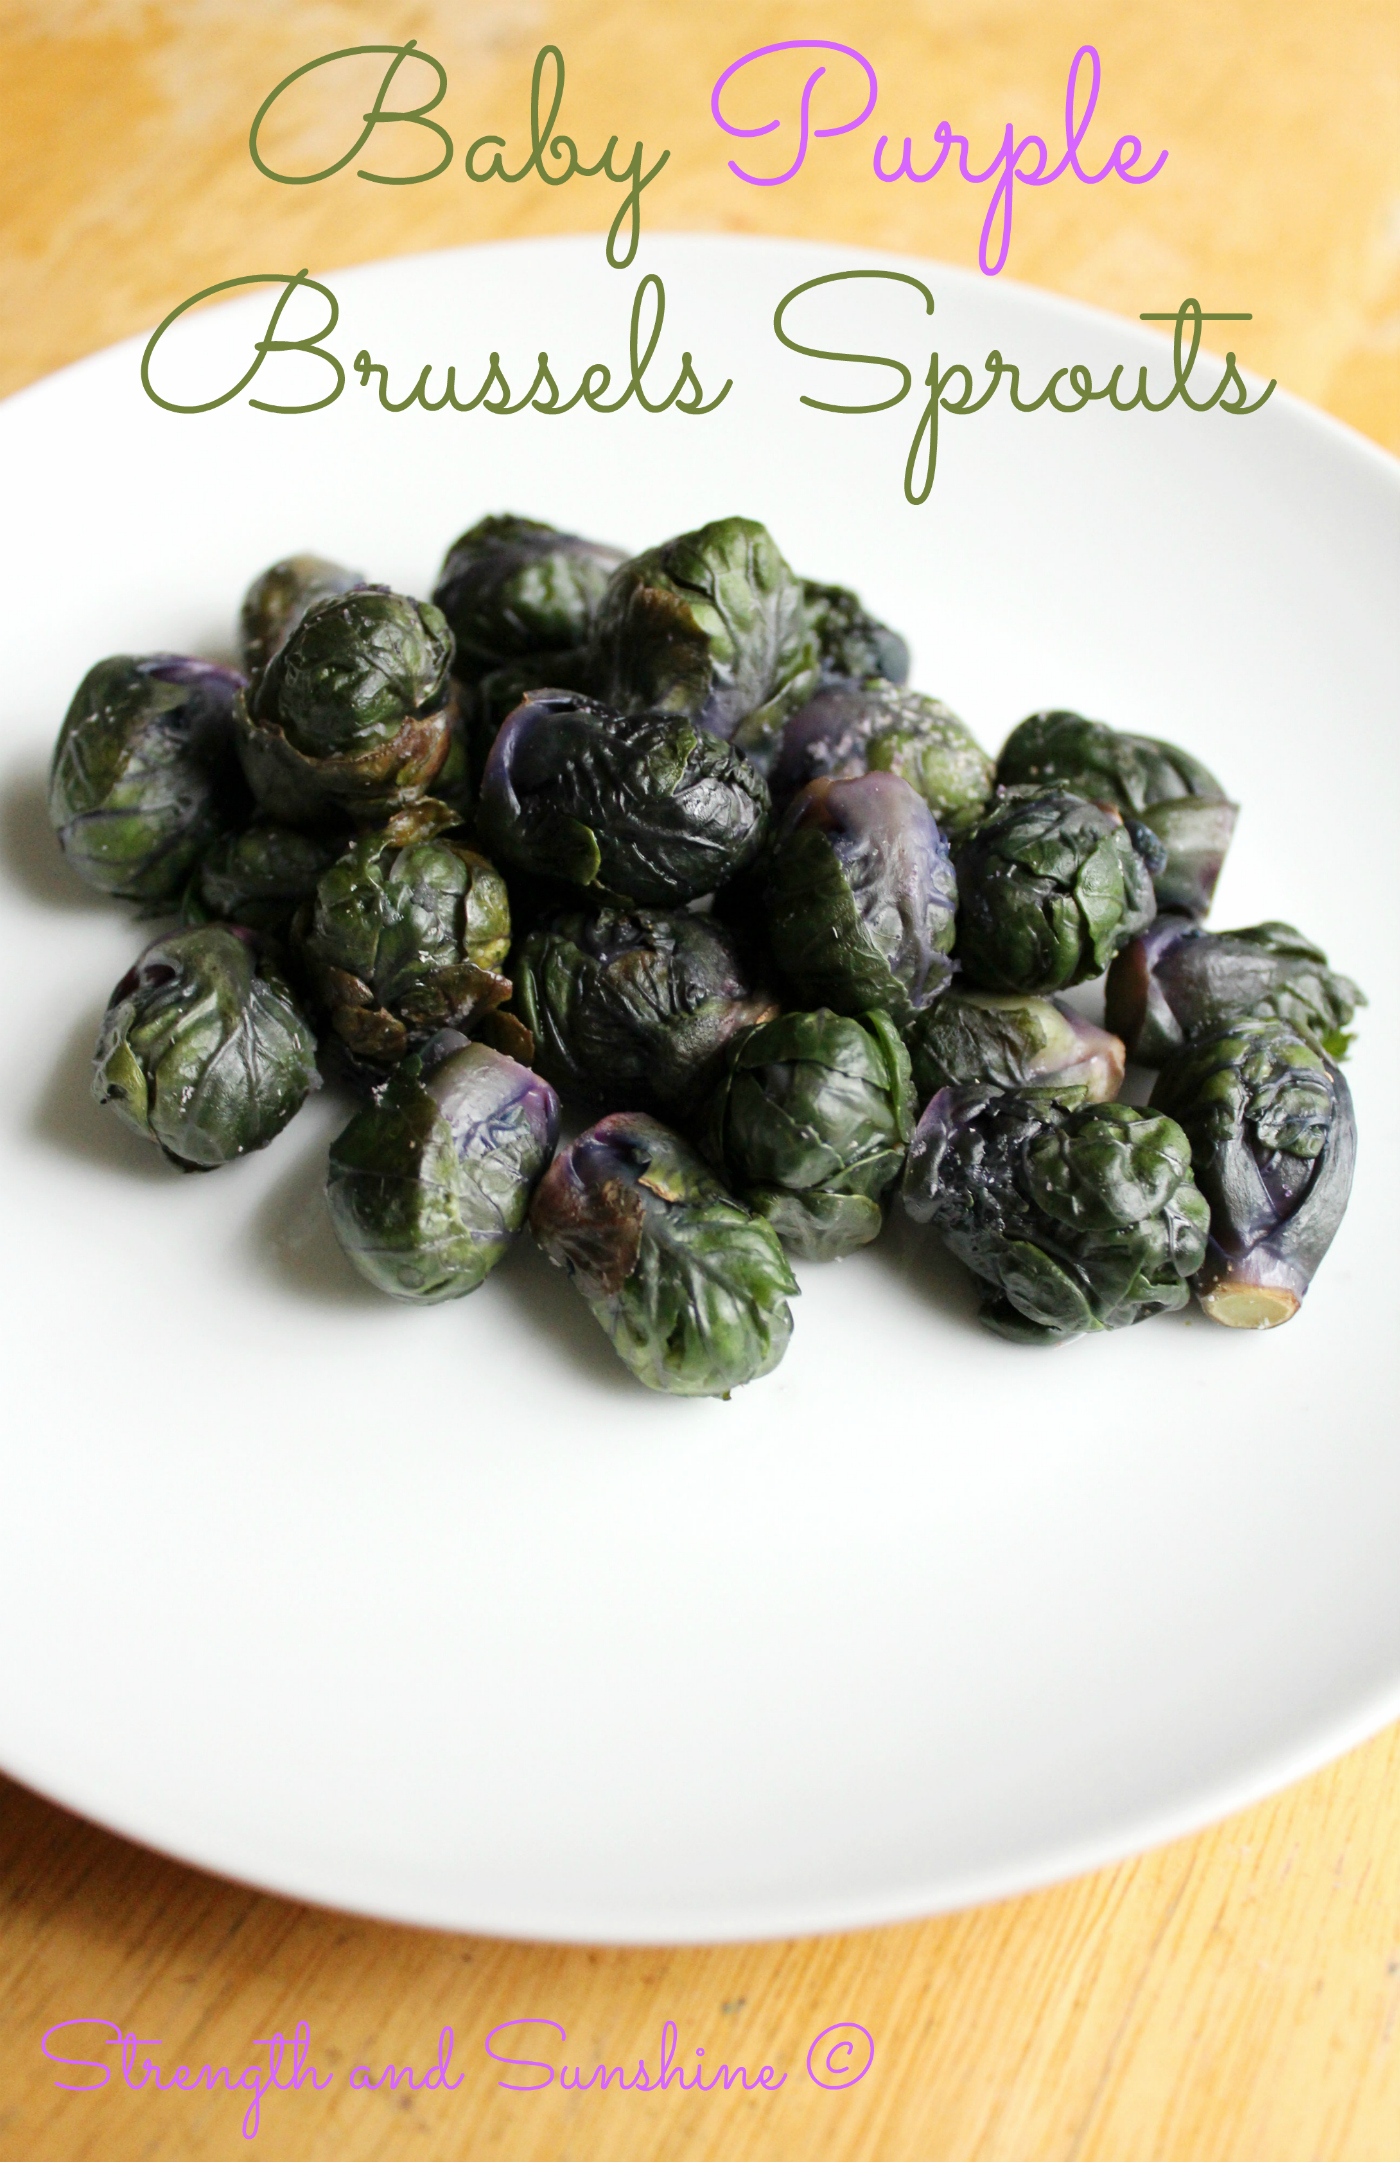 Baby-Purple-Brussels-Sprouts-5.5